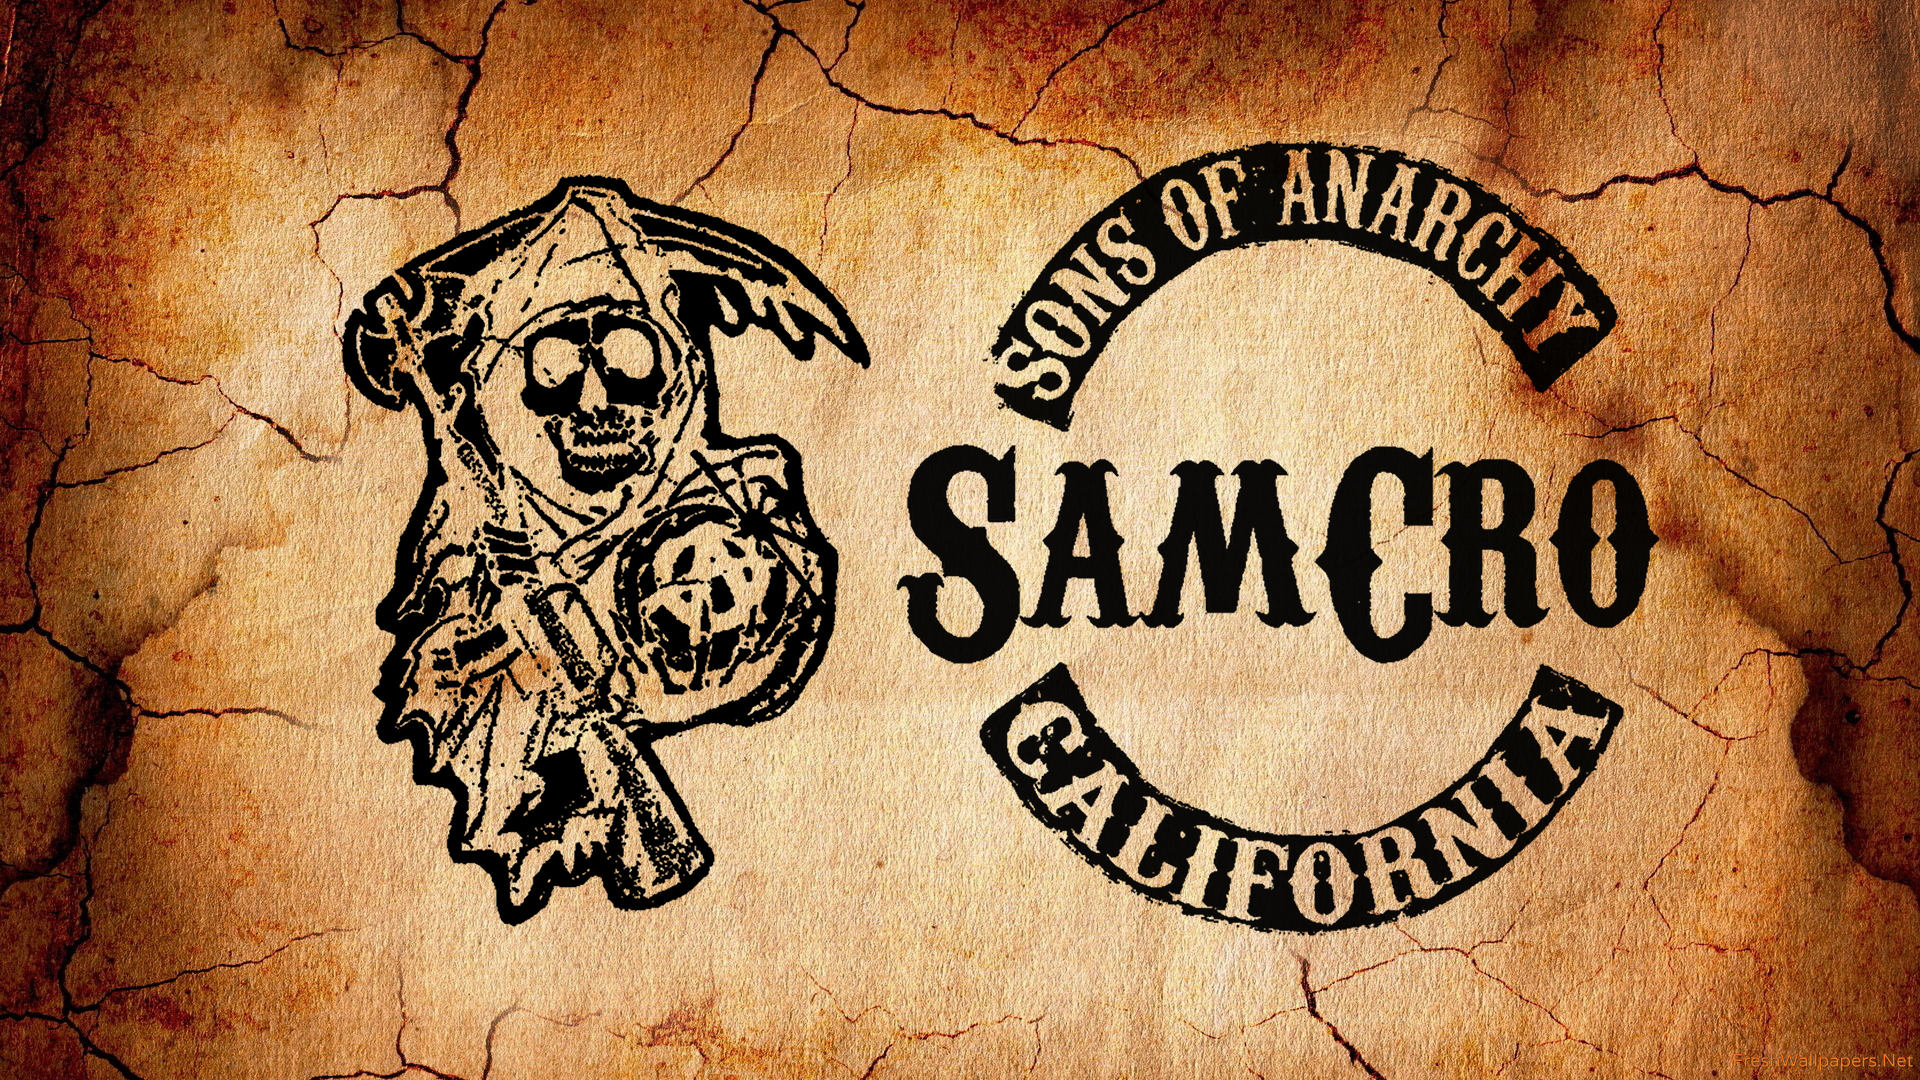 Sons Of Anarchy Iphone Wallpapers